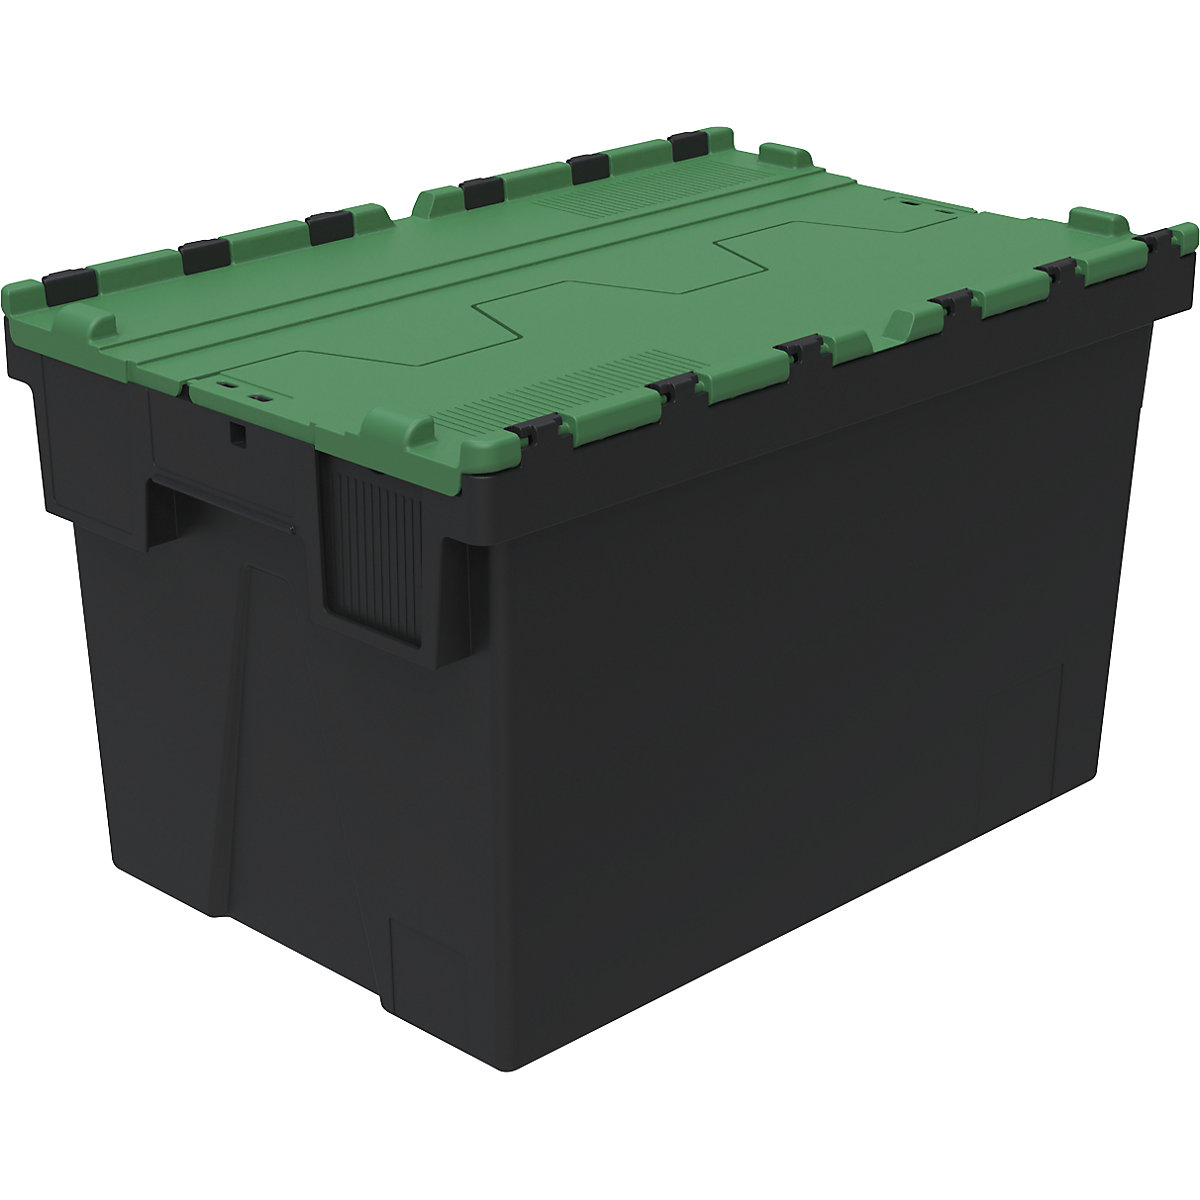 Reusable stacking container, LxWxH 600 x 400 x 367 mm, black/green-1